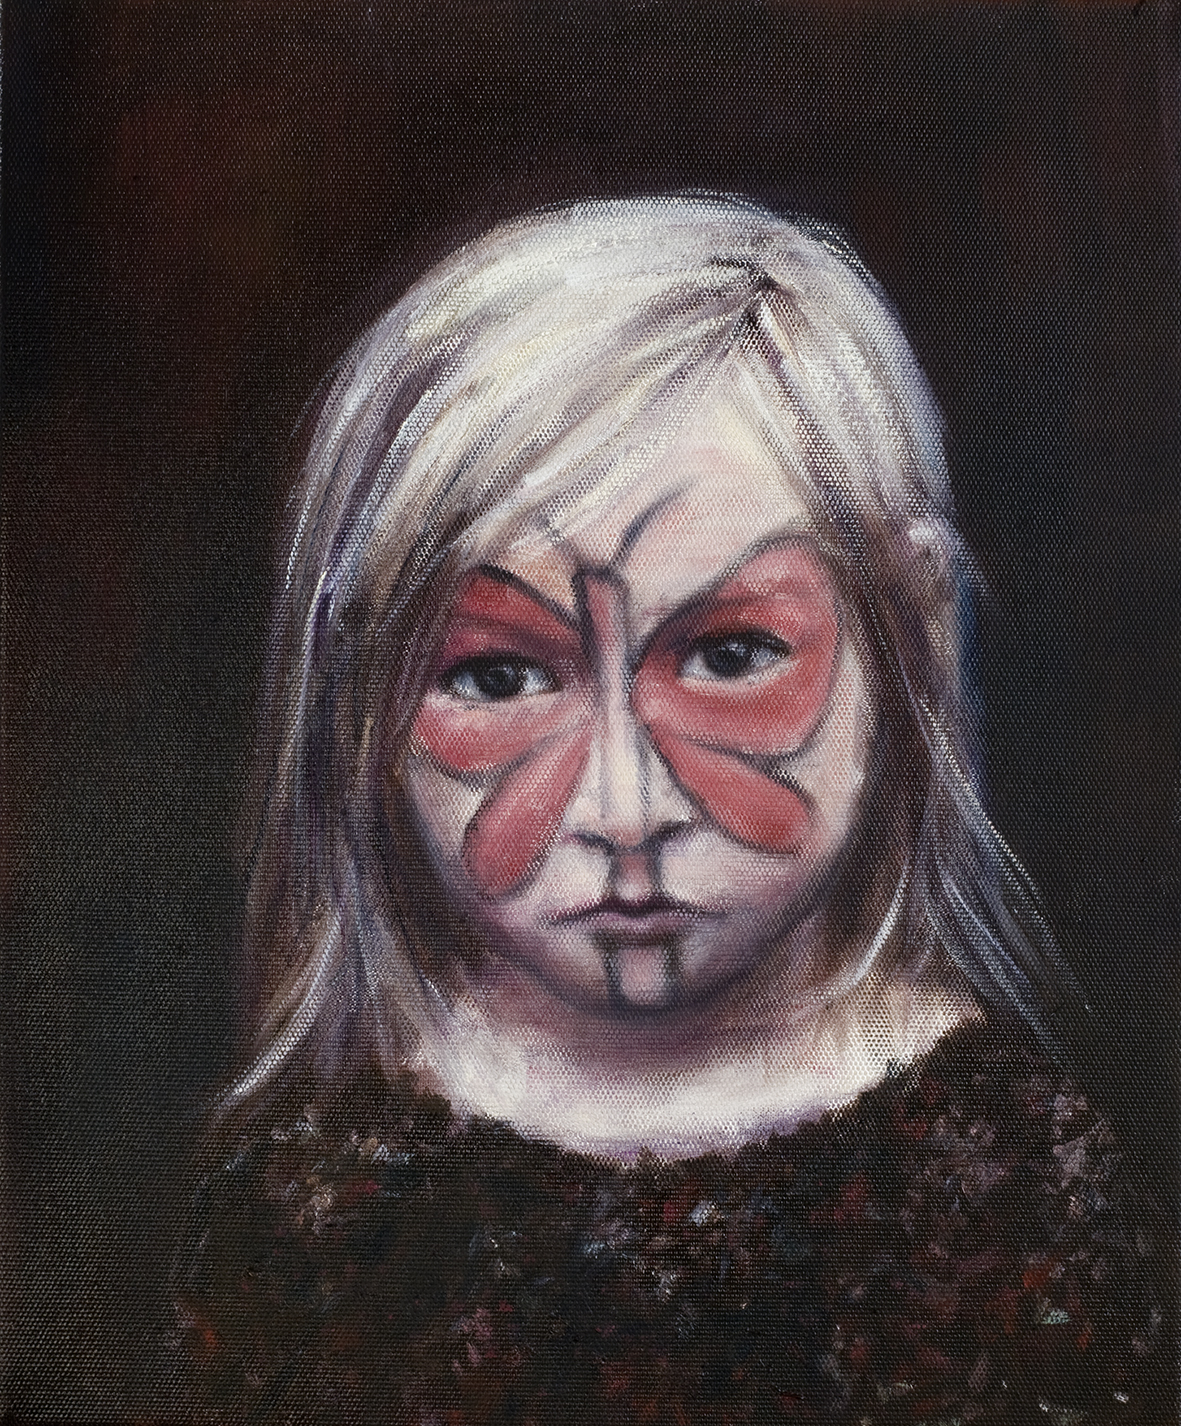   Girl with face painting  Oil on canvas 46x38 cm 2008 